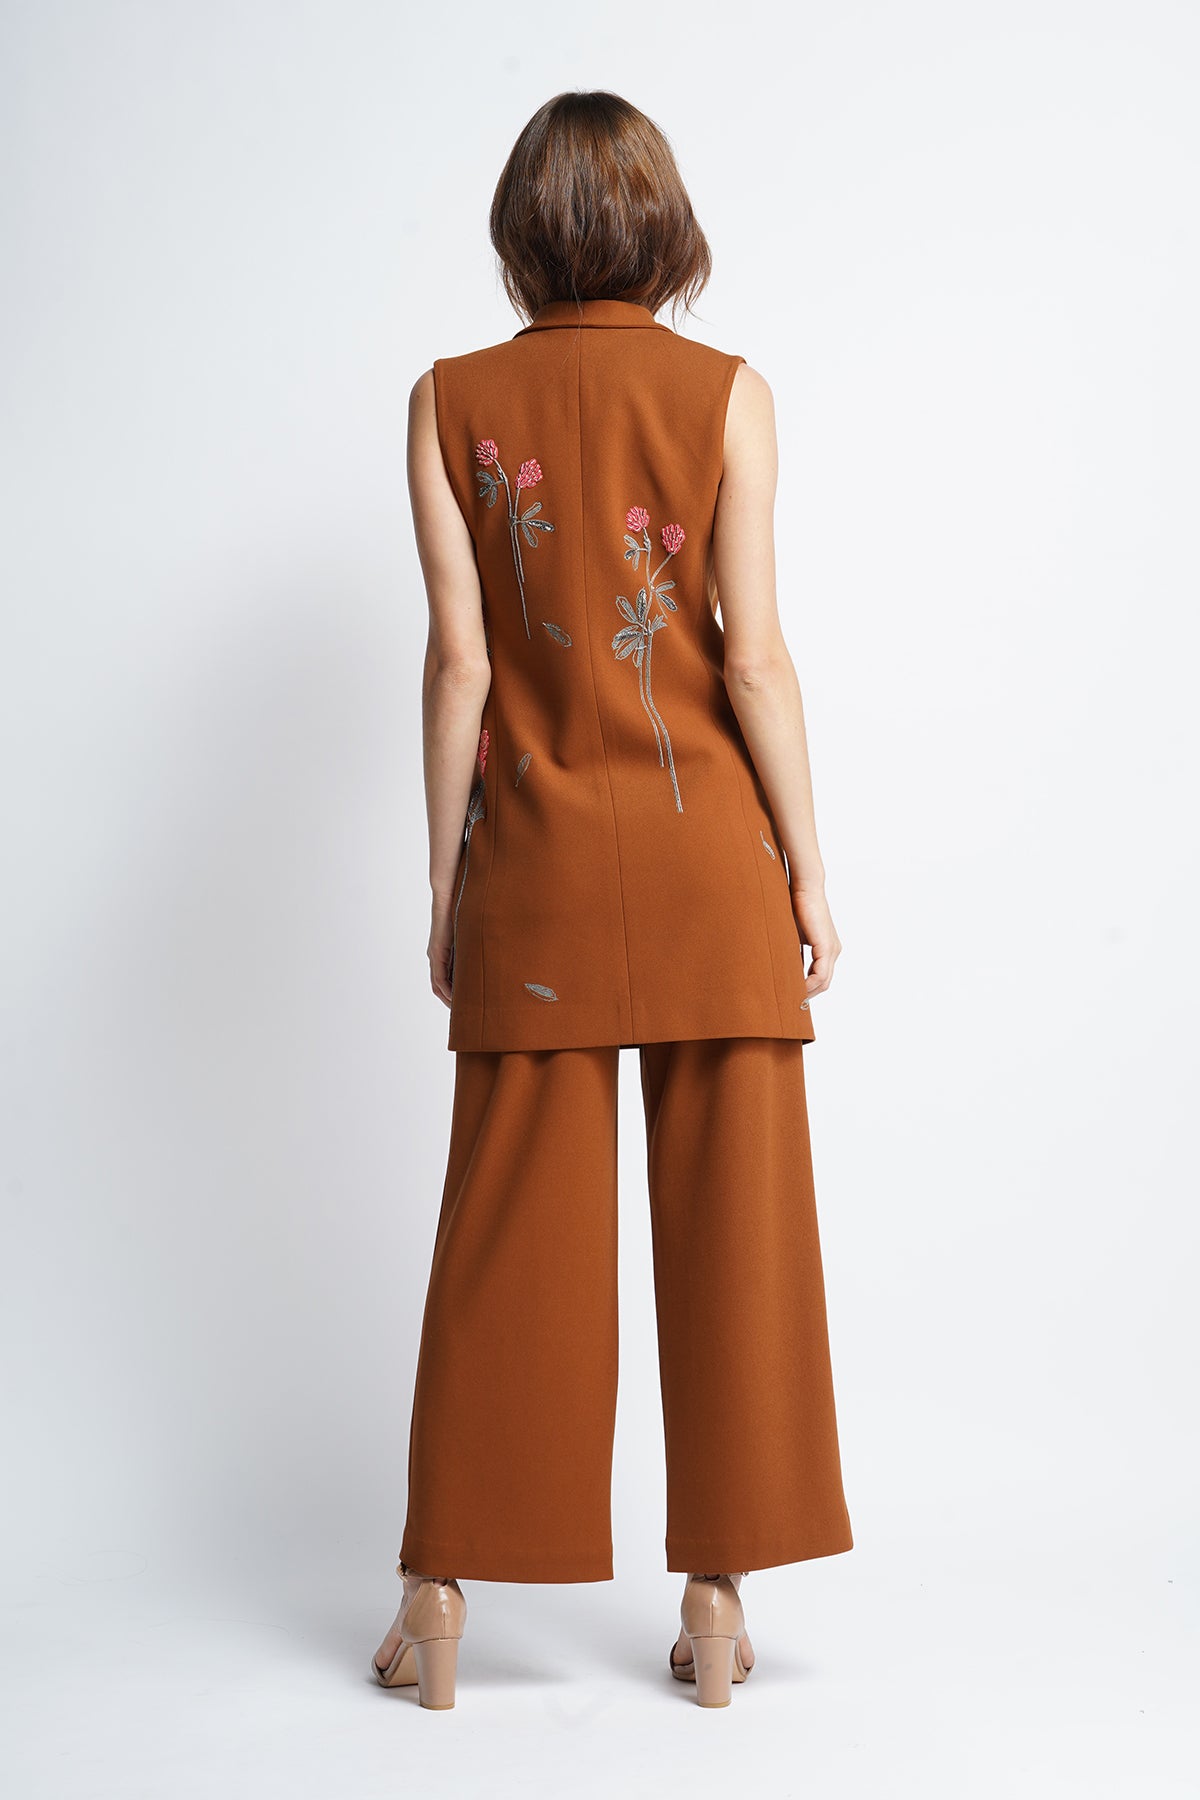 Meadow Plant Overlapped Sleeveless Coat Dress With Pants